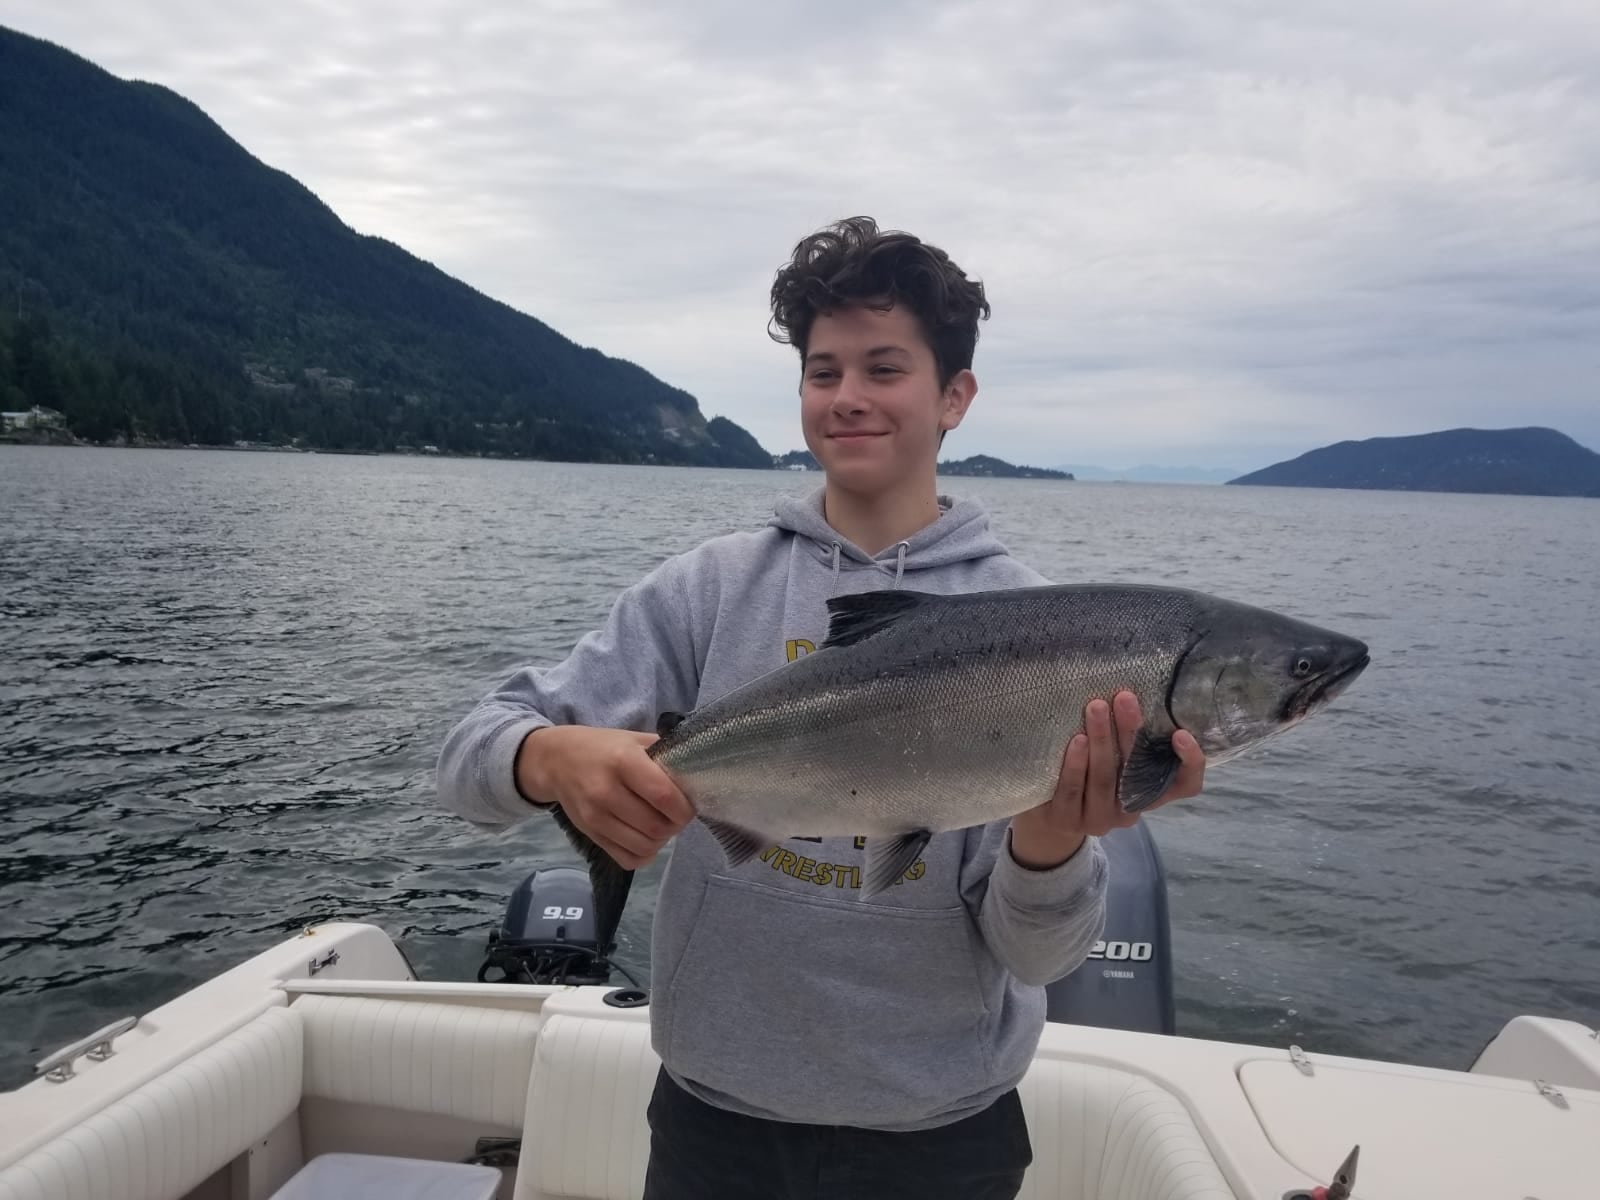 Fishing trips off the coast of West Vancouver is warming up